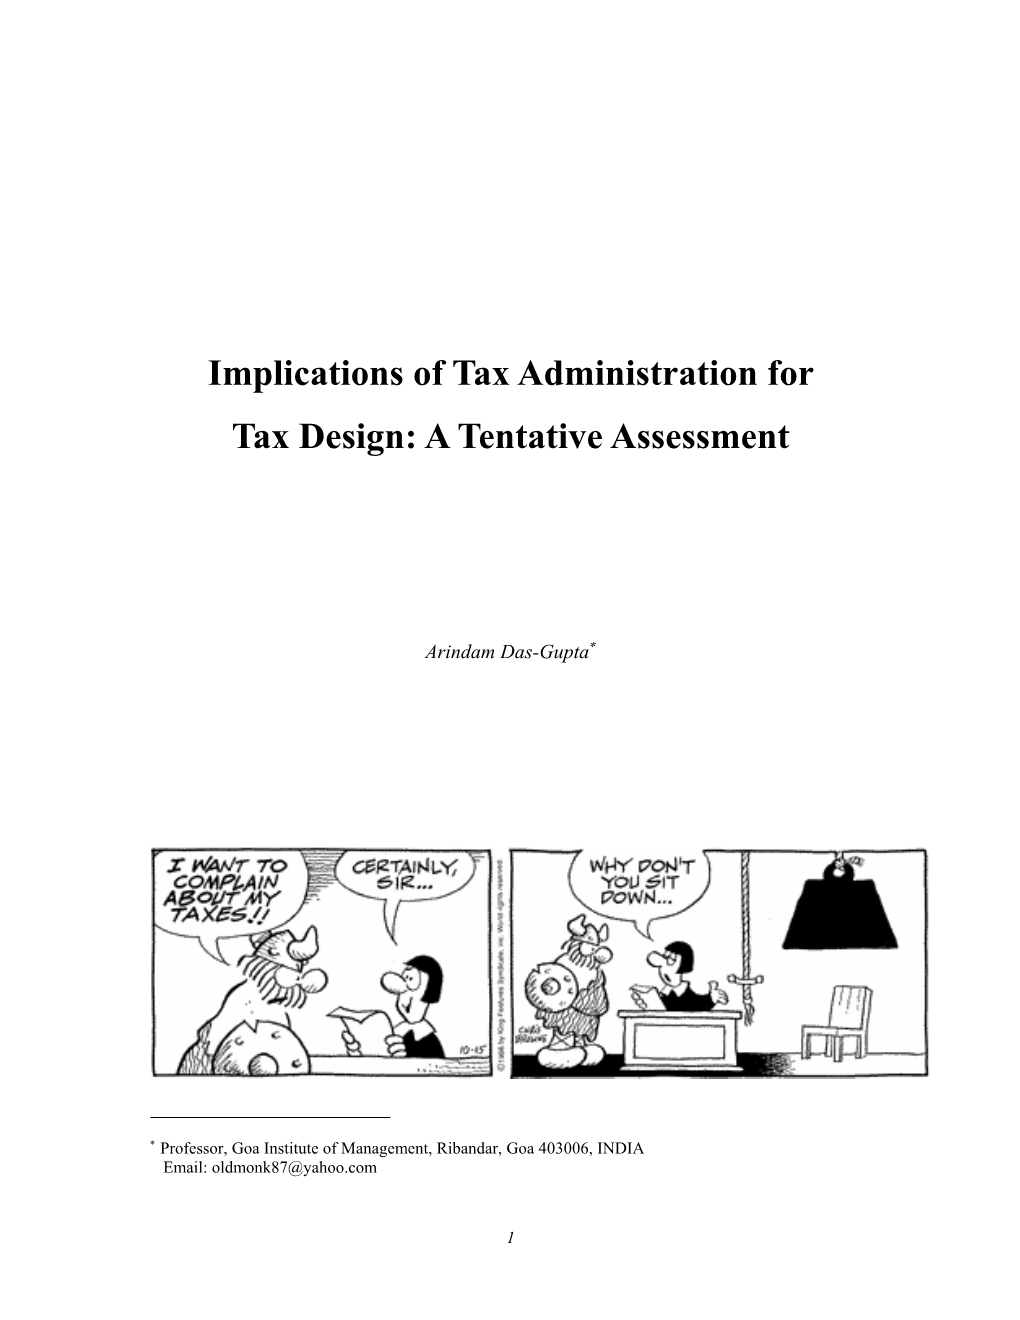 Implications of Tax Administration for Tax Design: a Tentative Assessment